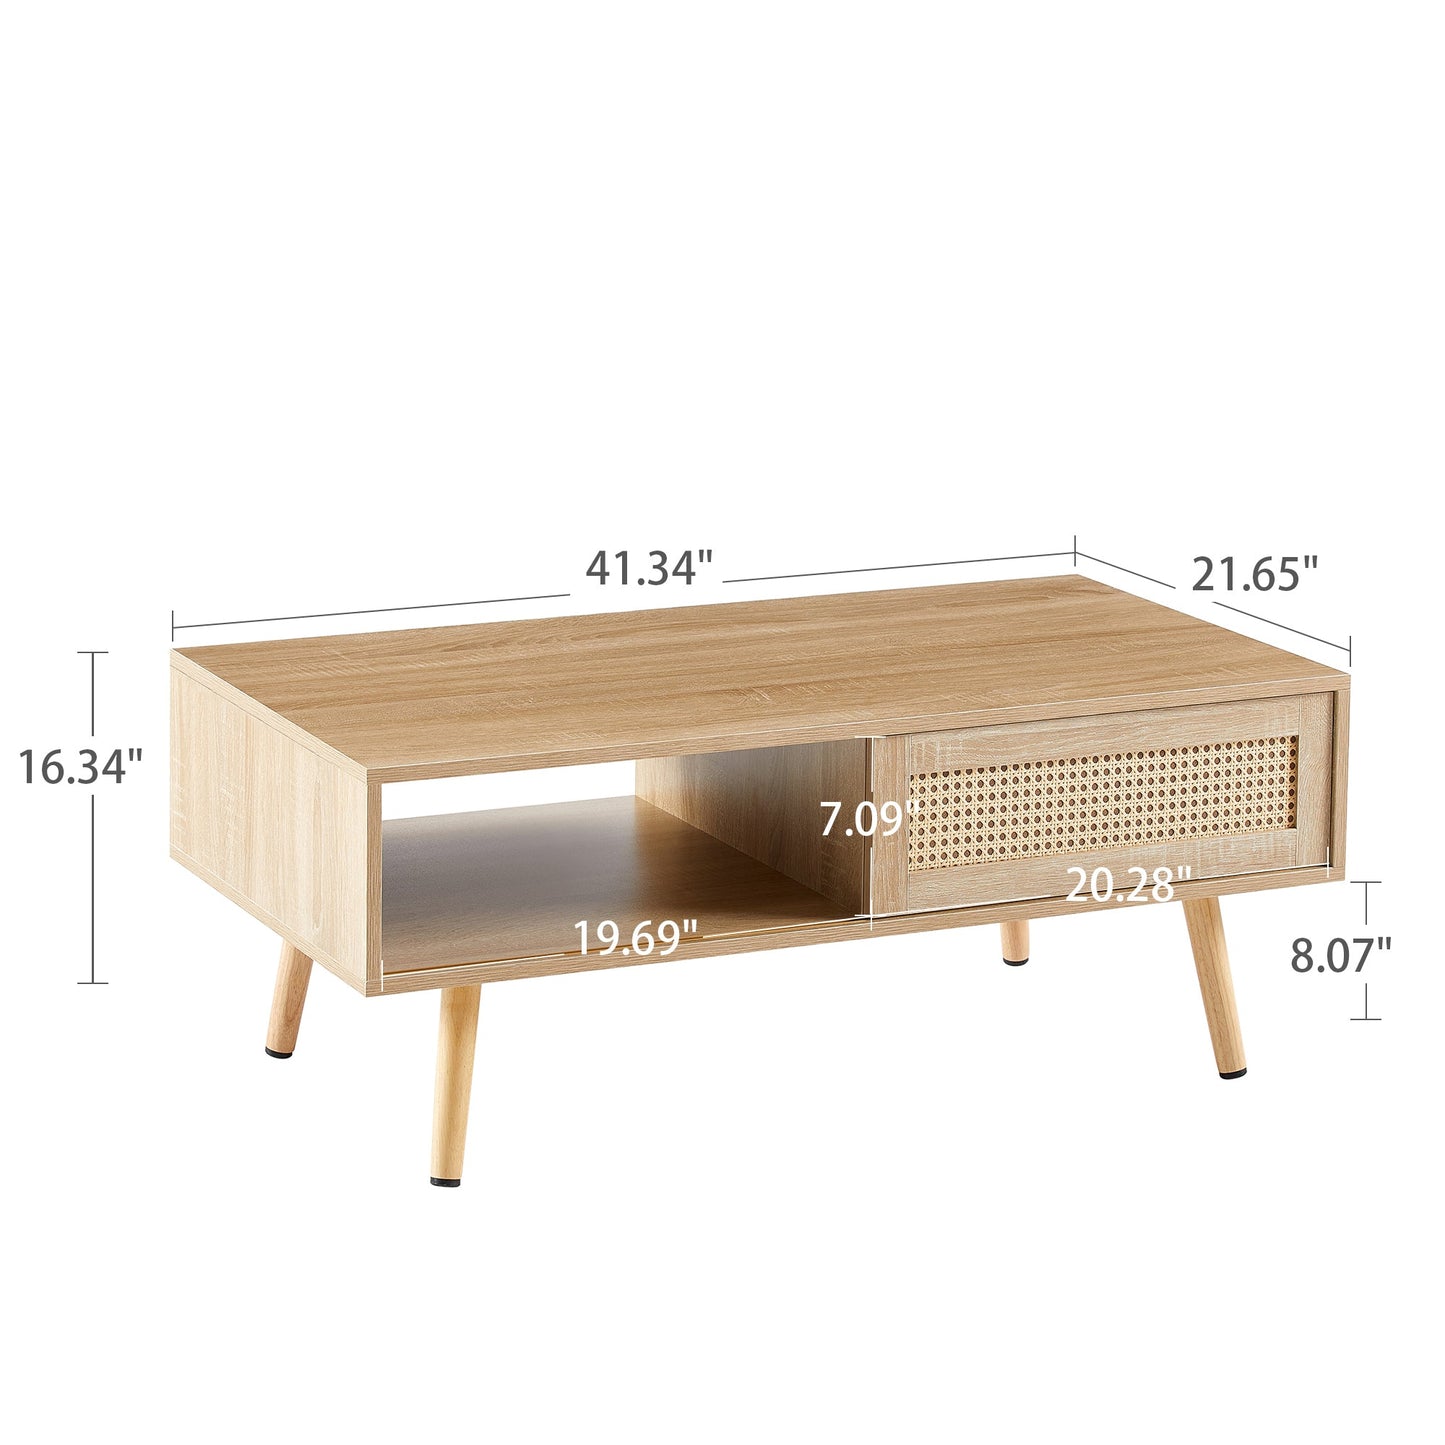 41.34" Rattan Coffee table, sliding door for storage, solid wood legs, Modern table for living room , natural - Groovy Boardz